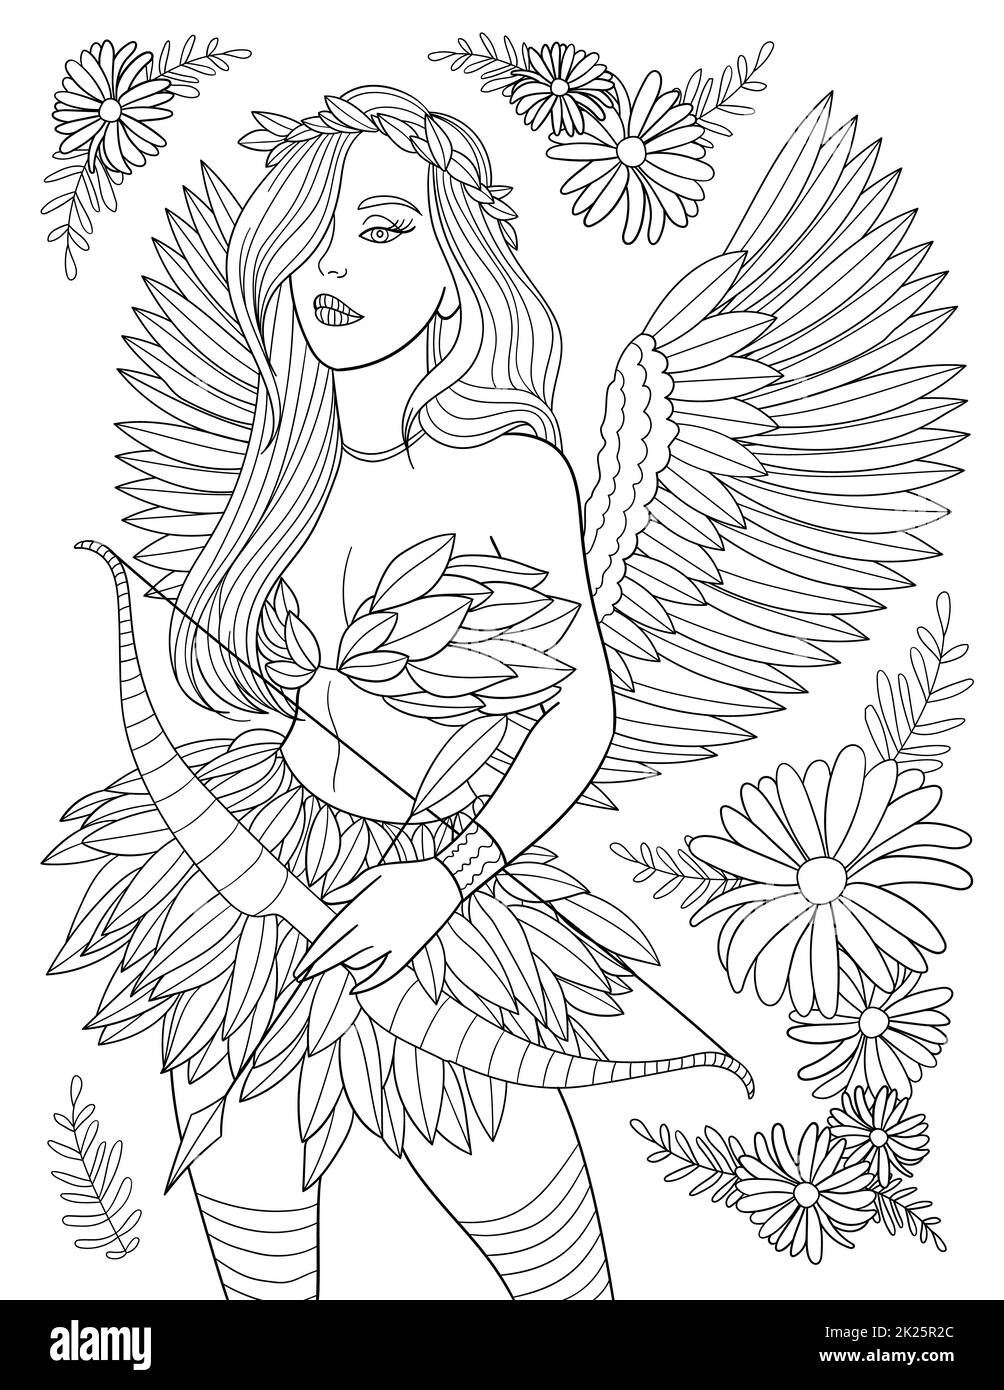 Lady Warrior With Wings Holding Arrows And Bow Line Drawing Coloring Book With Flowers Surrounding. Stock Photo